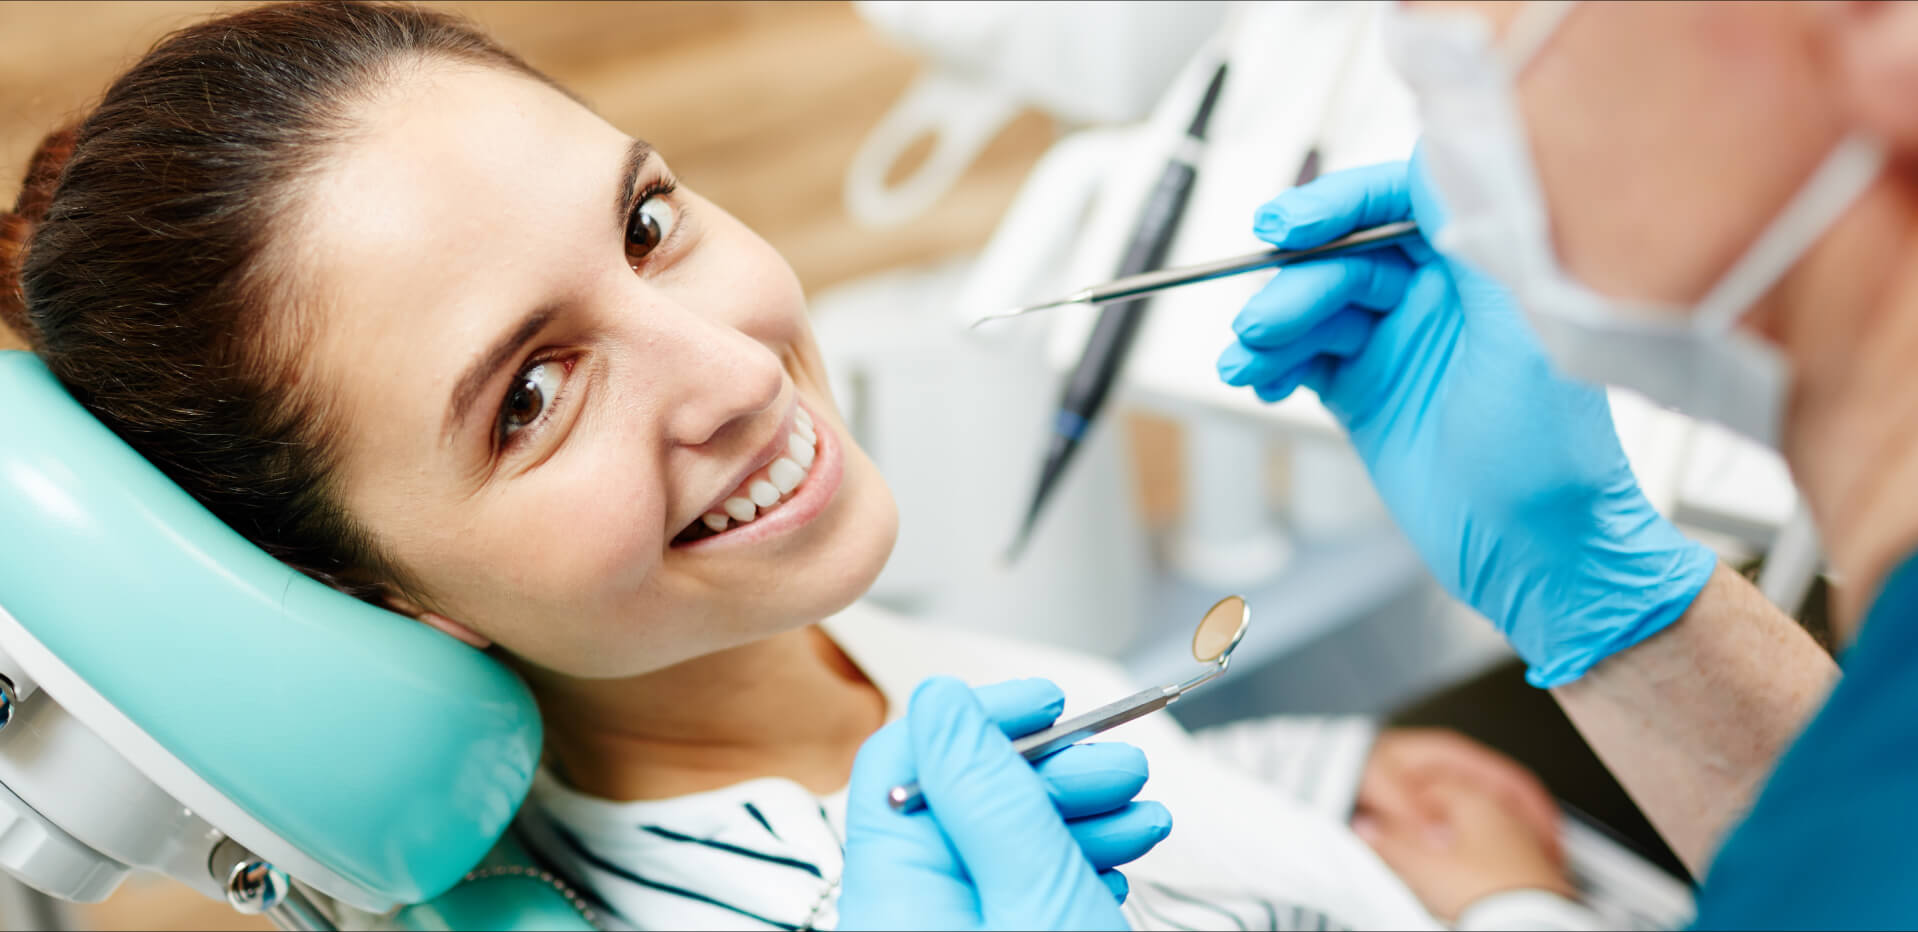 Best Dental Care Clinic Hyderabad Has With Great Services